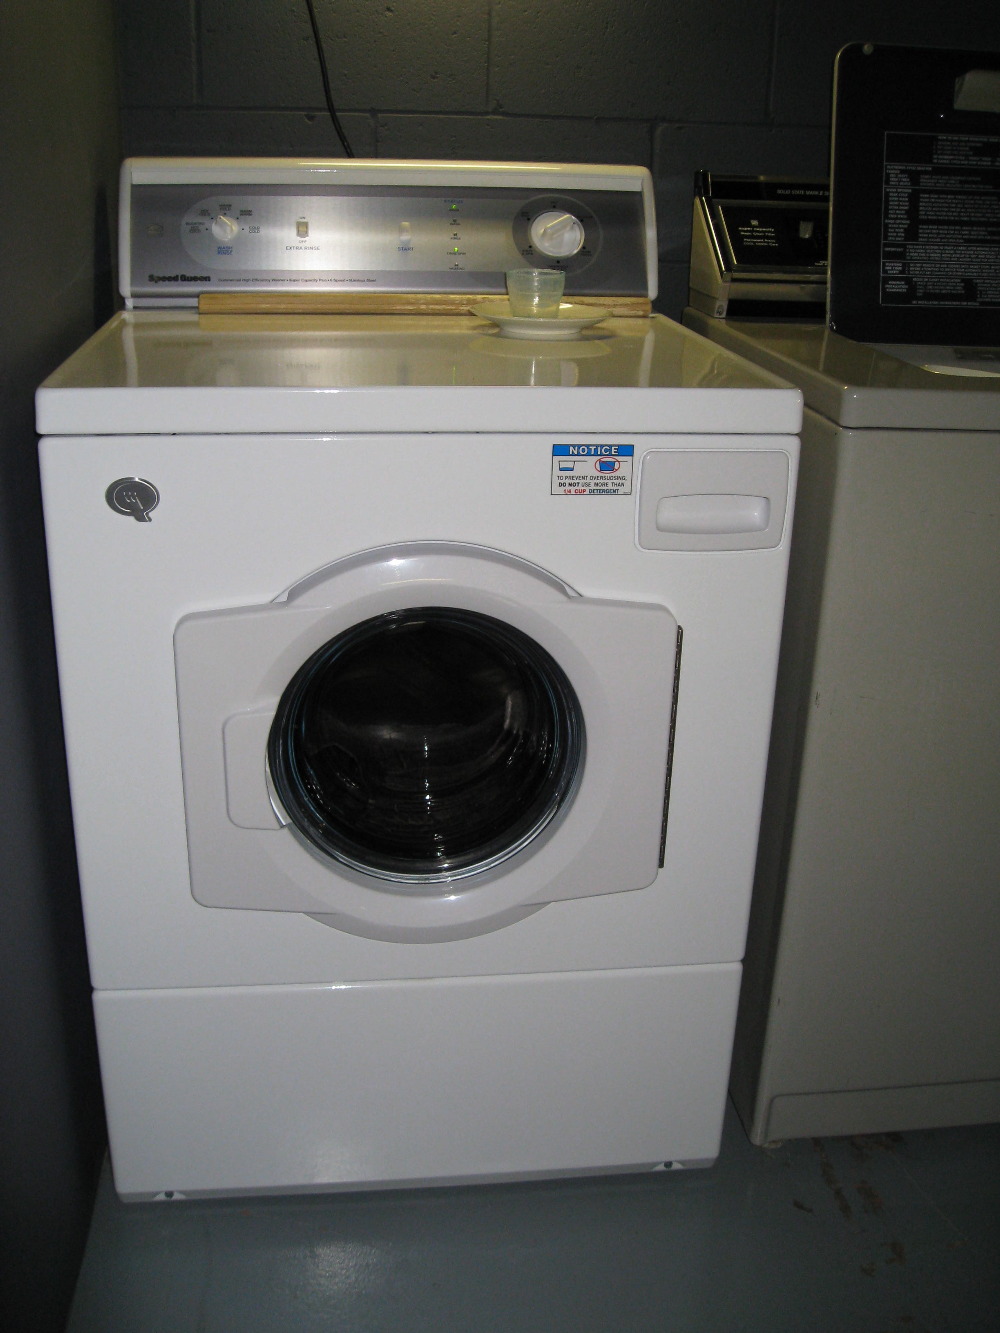 Genuine Zanussi ZWD 1270S washing machine & Dryer All Working Parts Available 